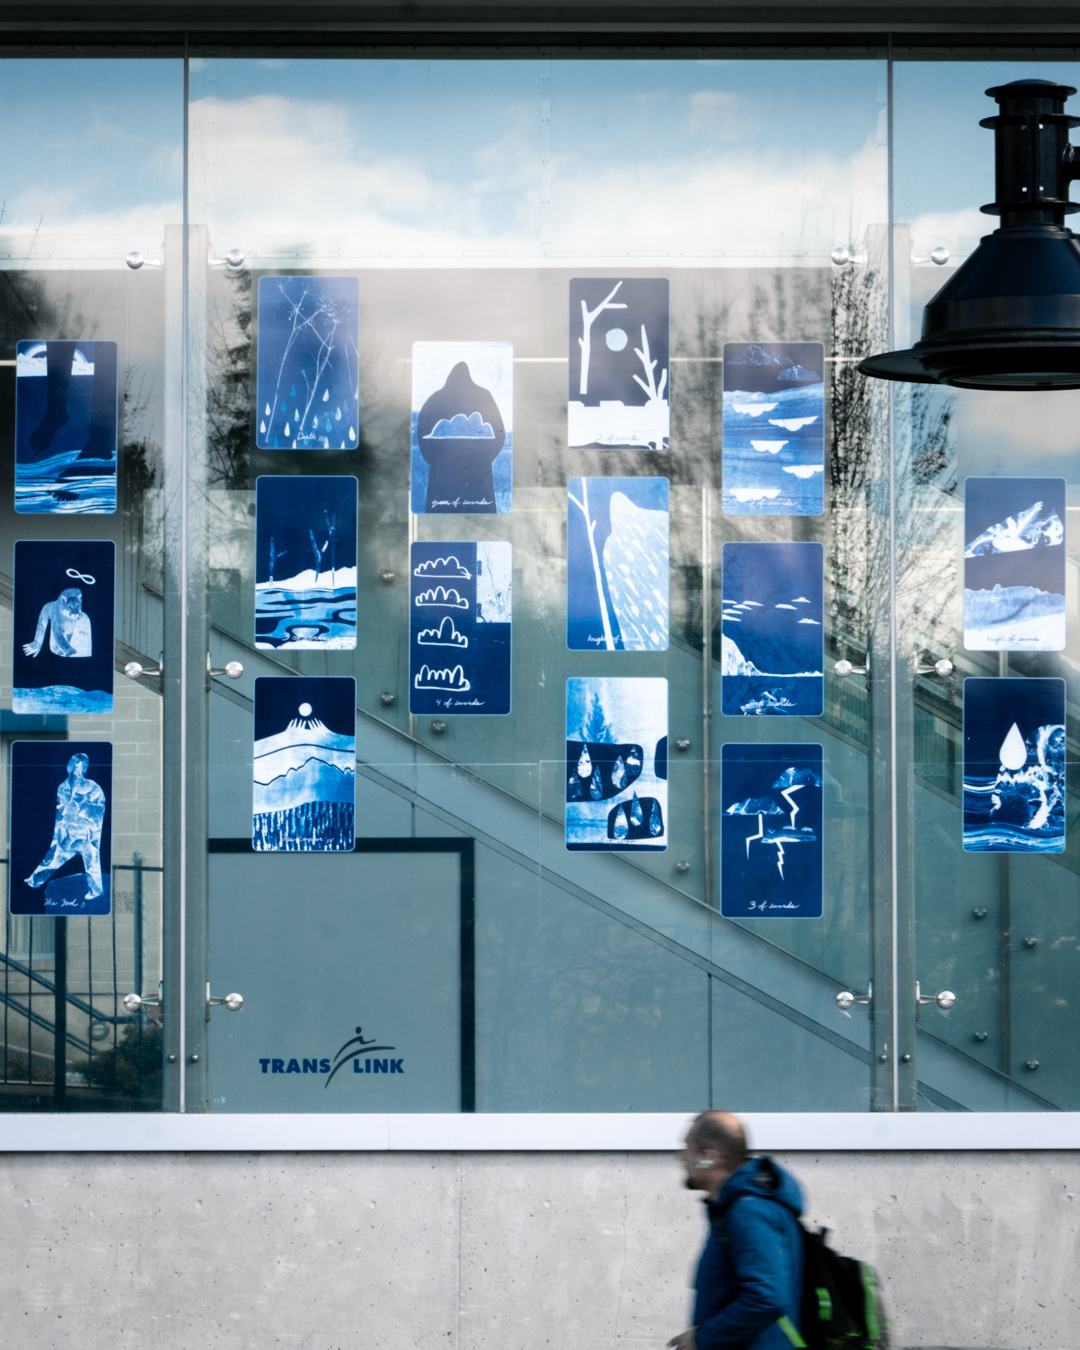 Some cards of the Blue Earth Tarot installed on the glass window at Lafarge Lake–Douglas Station